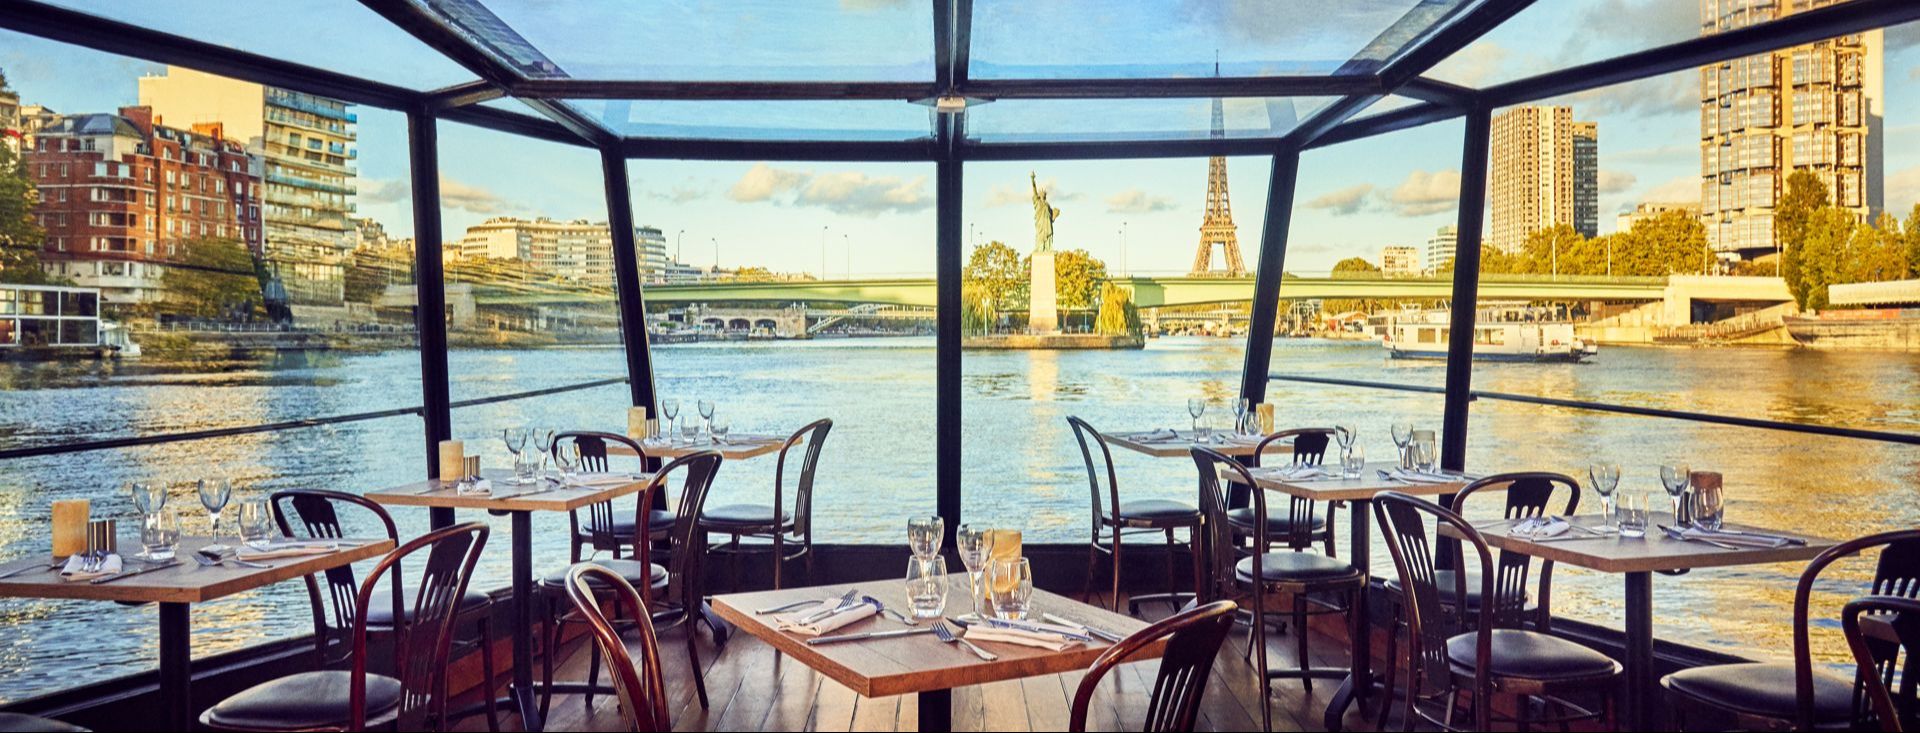 Romantic Seine River Lunch Cruise, Table at the bay window, Drinks included